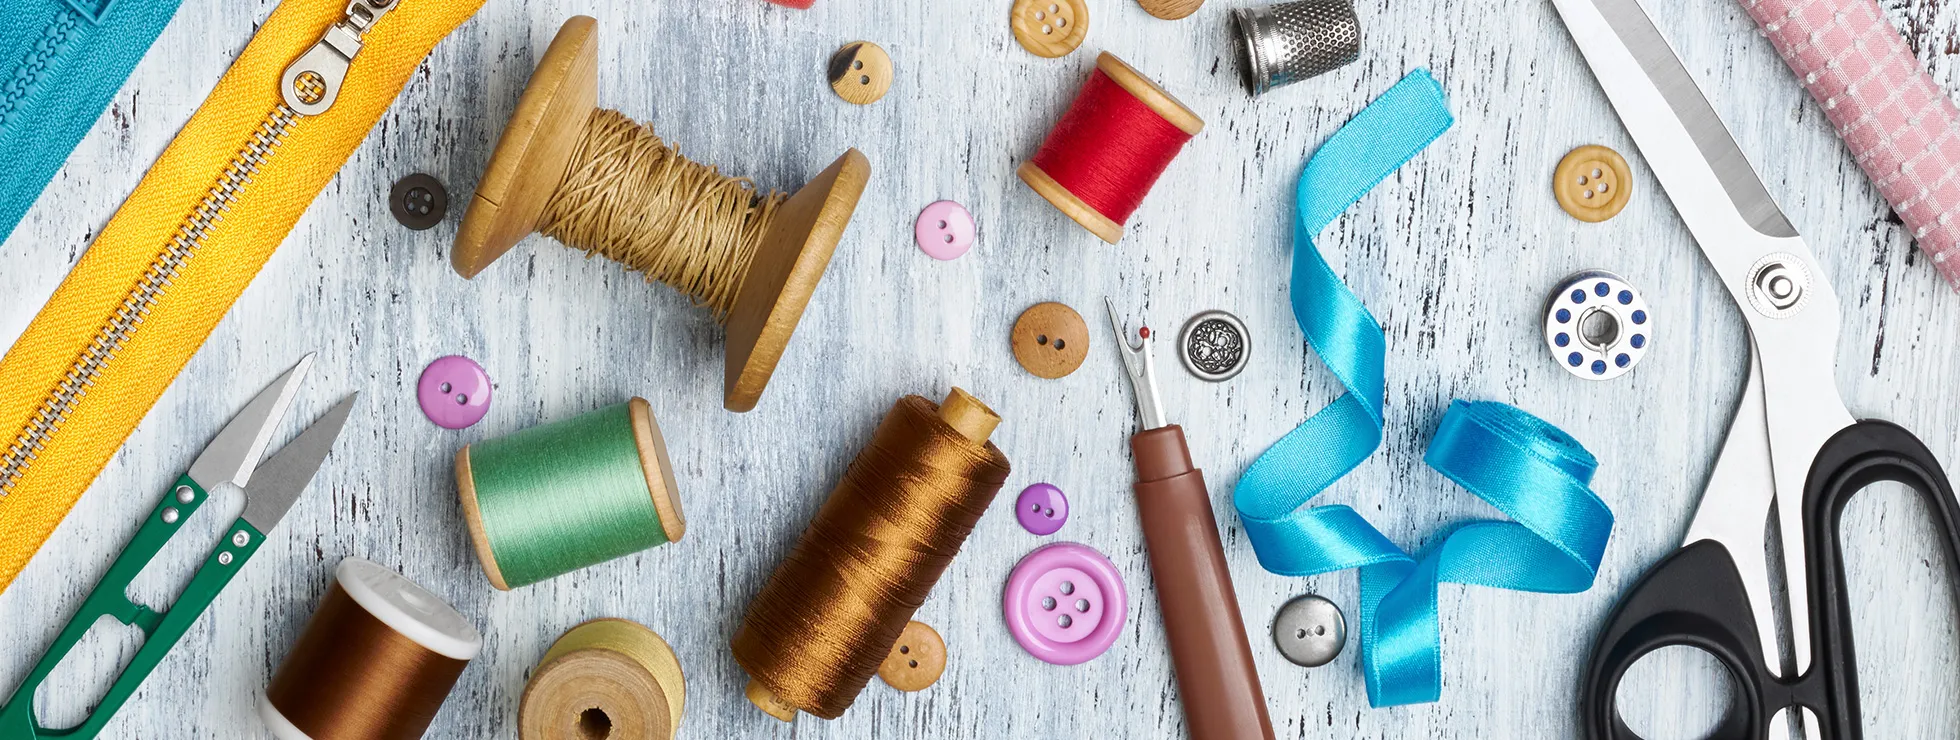 assortment of cotton reels, scissors, buttons, zips and other haberdashery, part of the Love Your Clothes visual identity